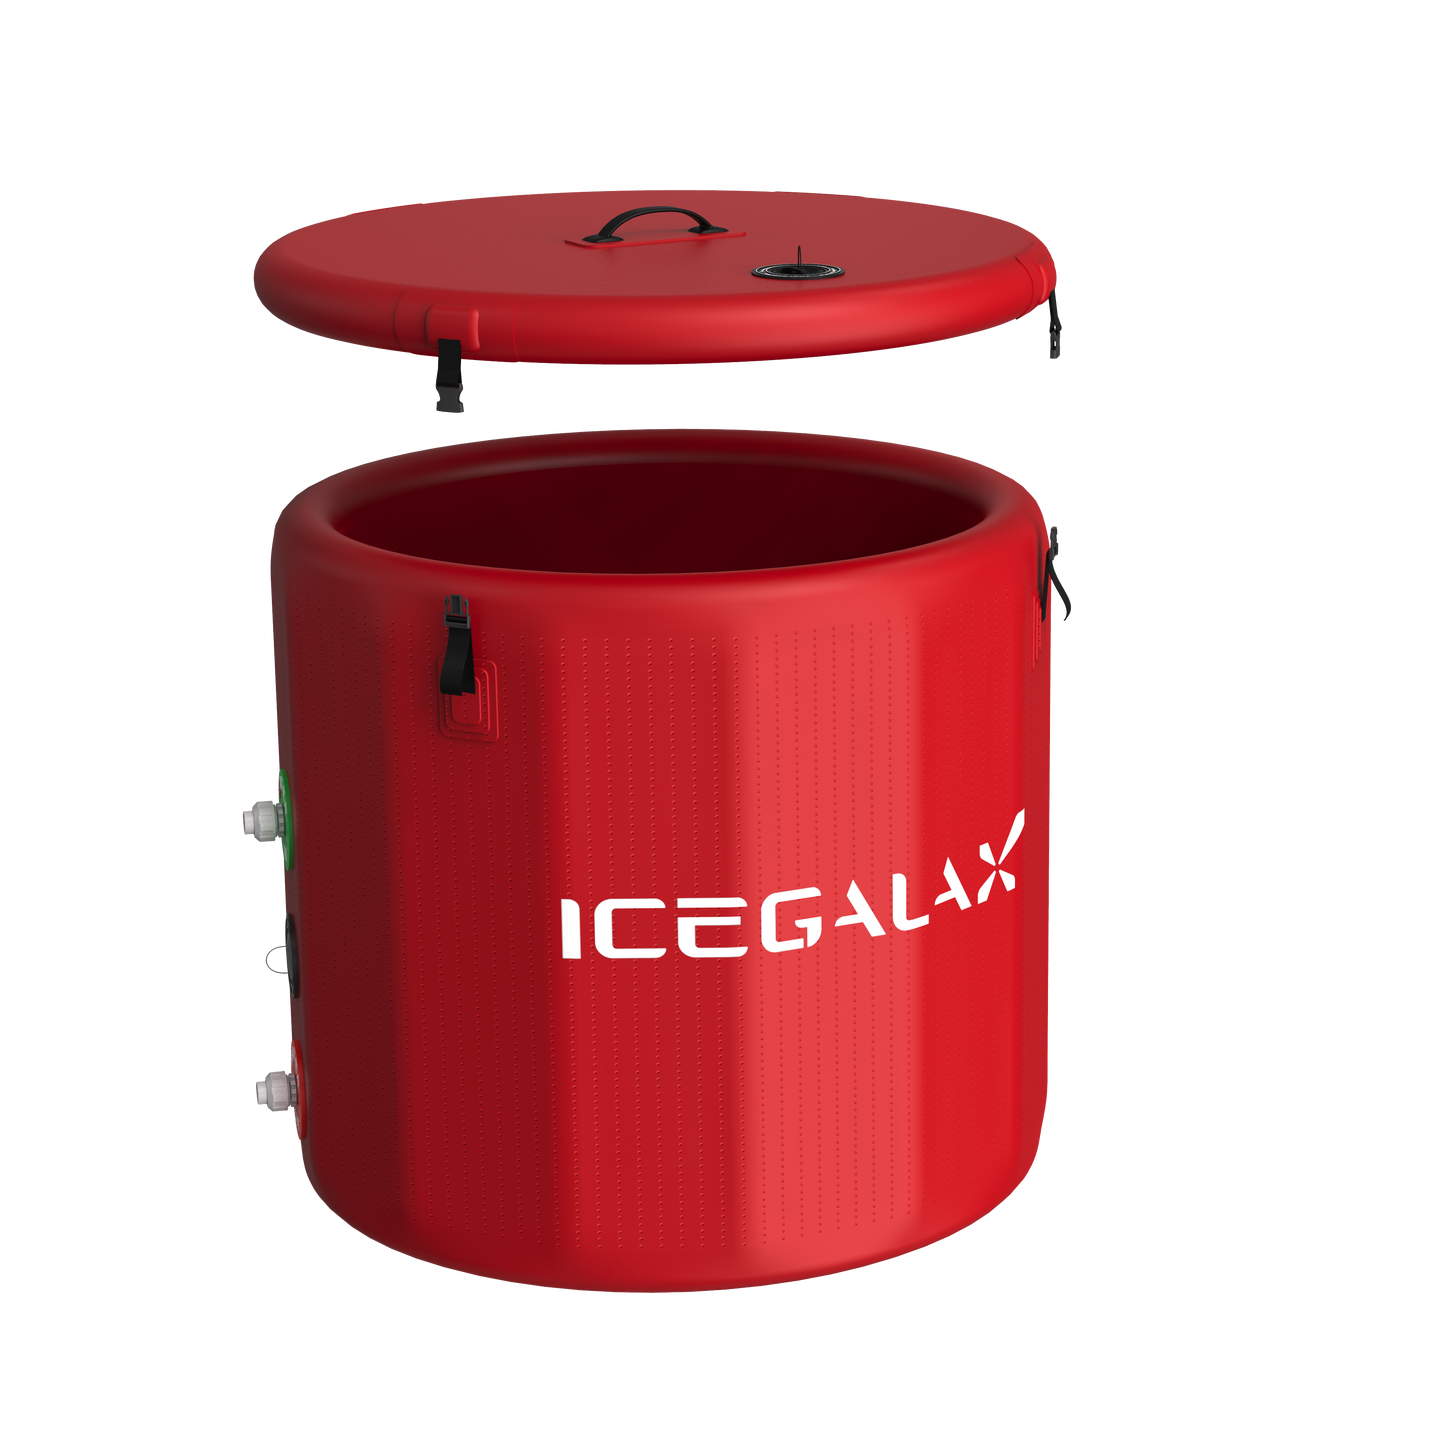 ICEGALAX Customized Red Inflatable Round Bathtub Ice Barrel For Cold Plunge